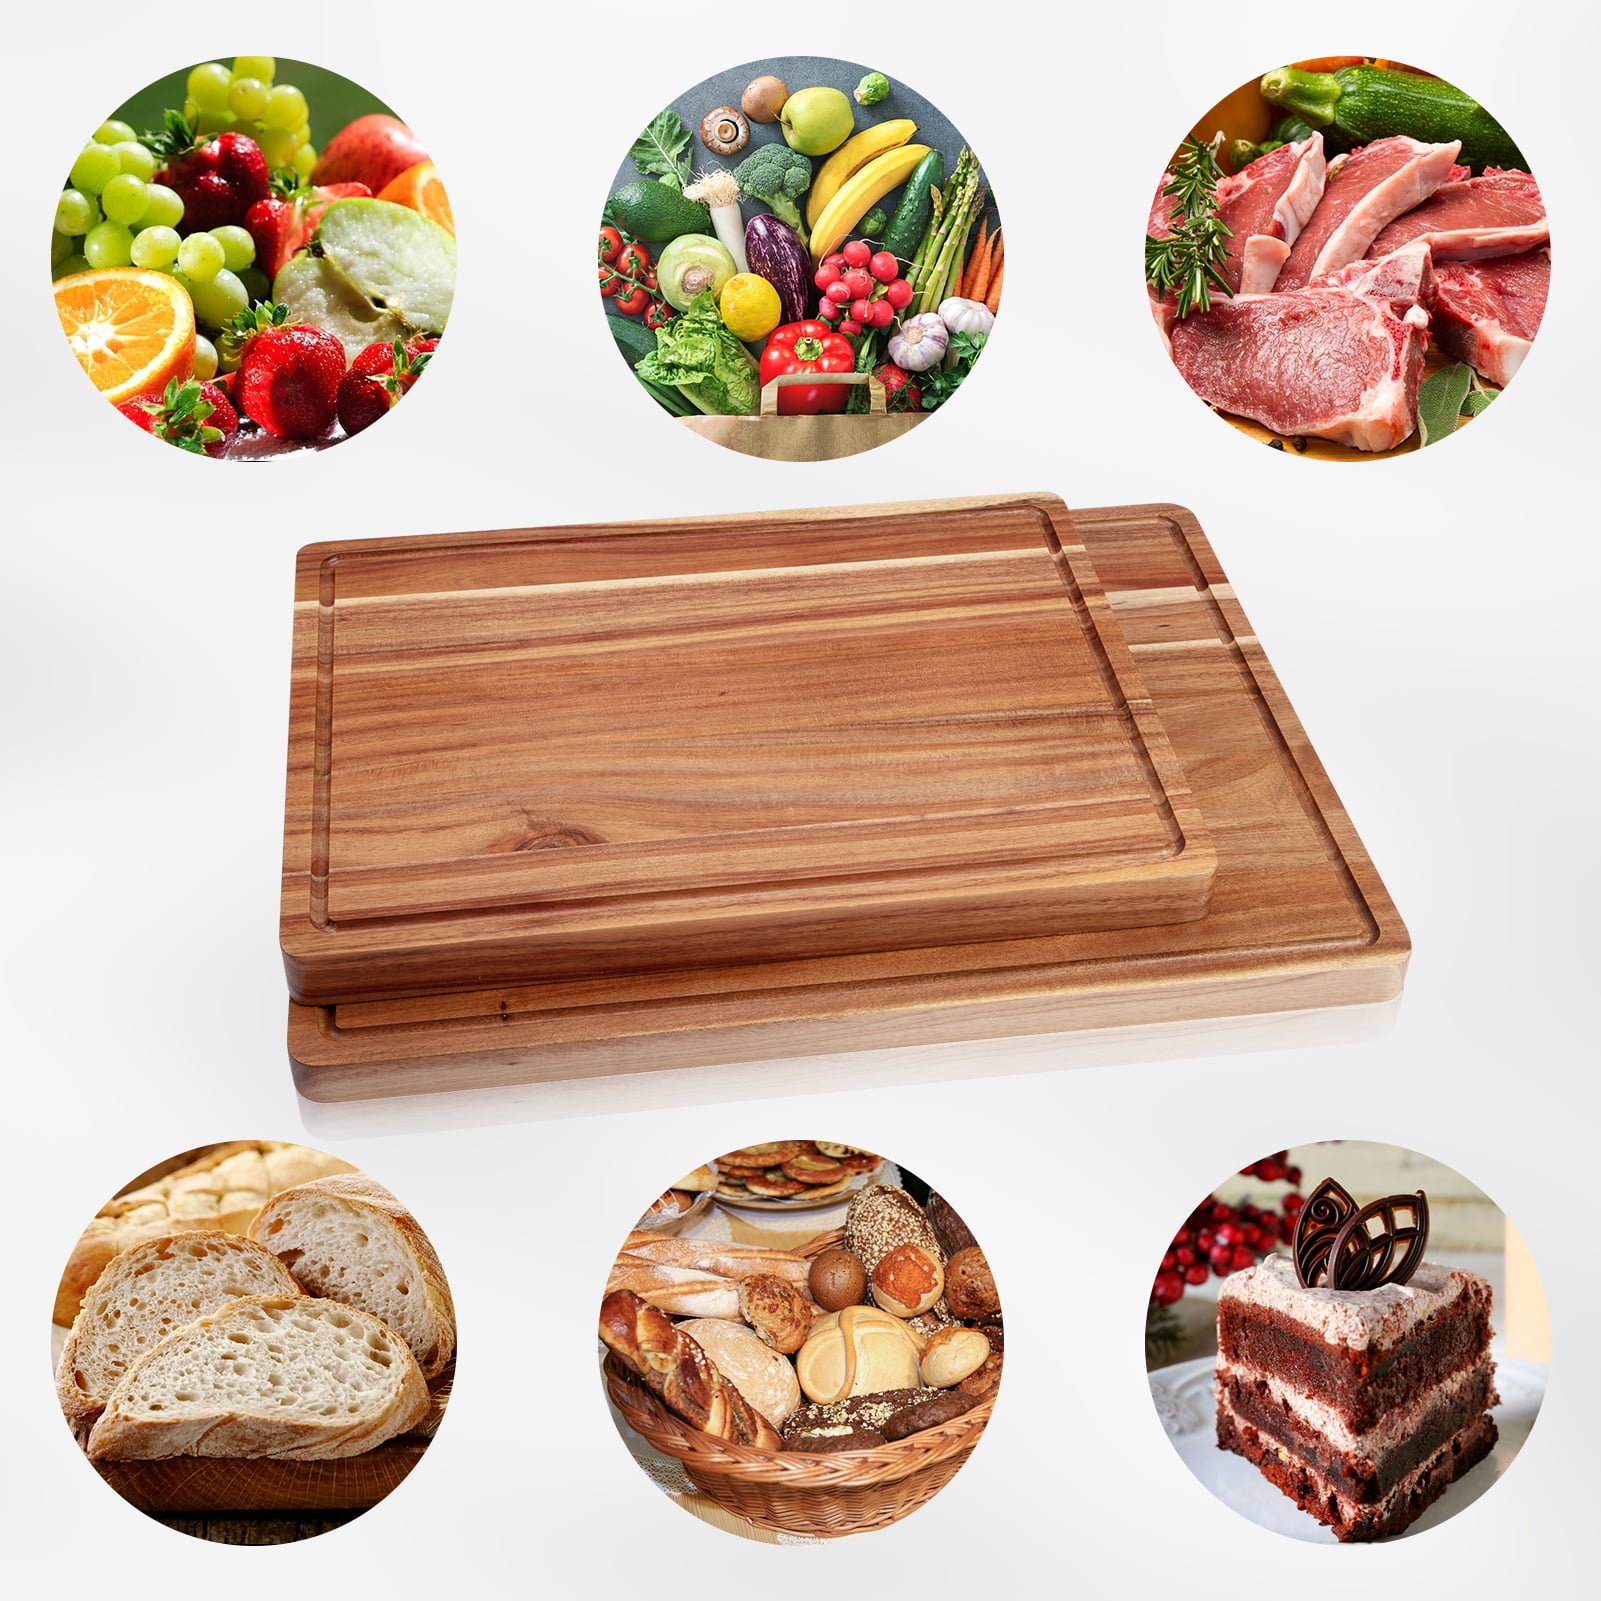 Thirteen Chefs Plastic Cutting Board with Juice Groove - Large Cutting  Board for Meat, Grilling, BBQ, Smoking, Fruit, and More - 24 x 18 x 0.75  